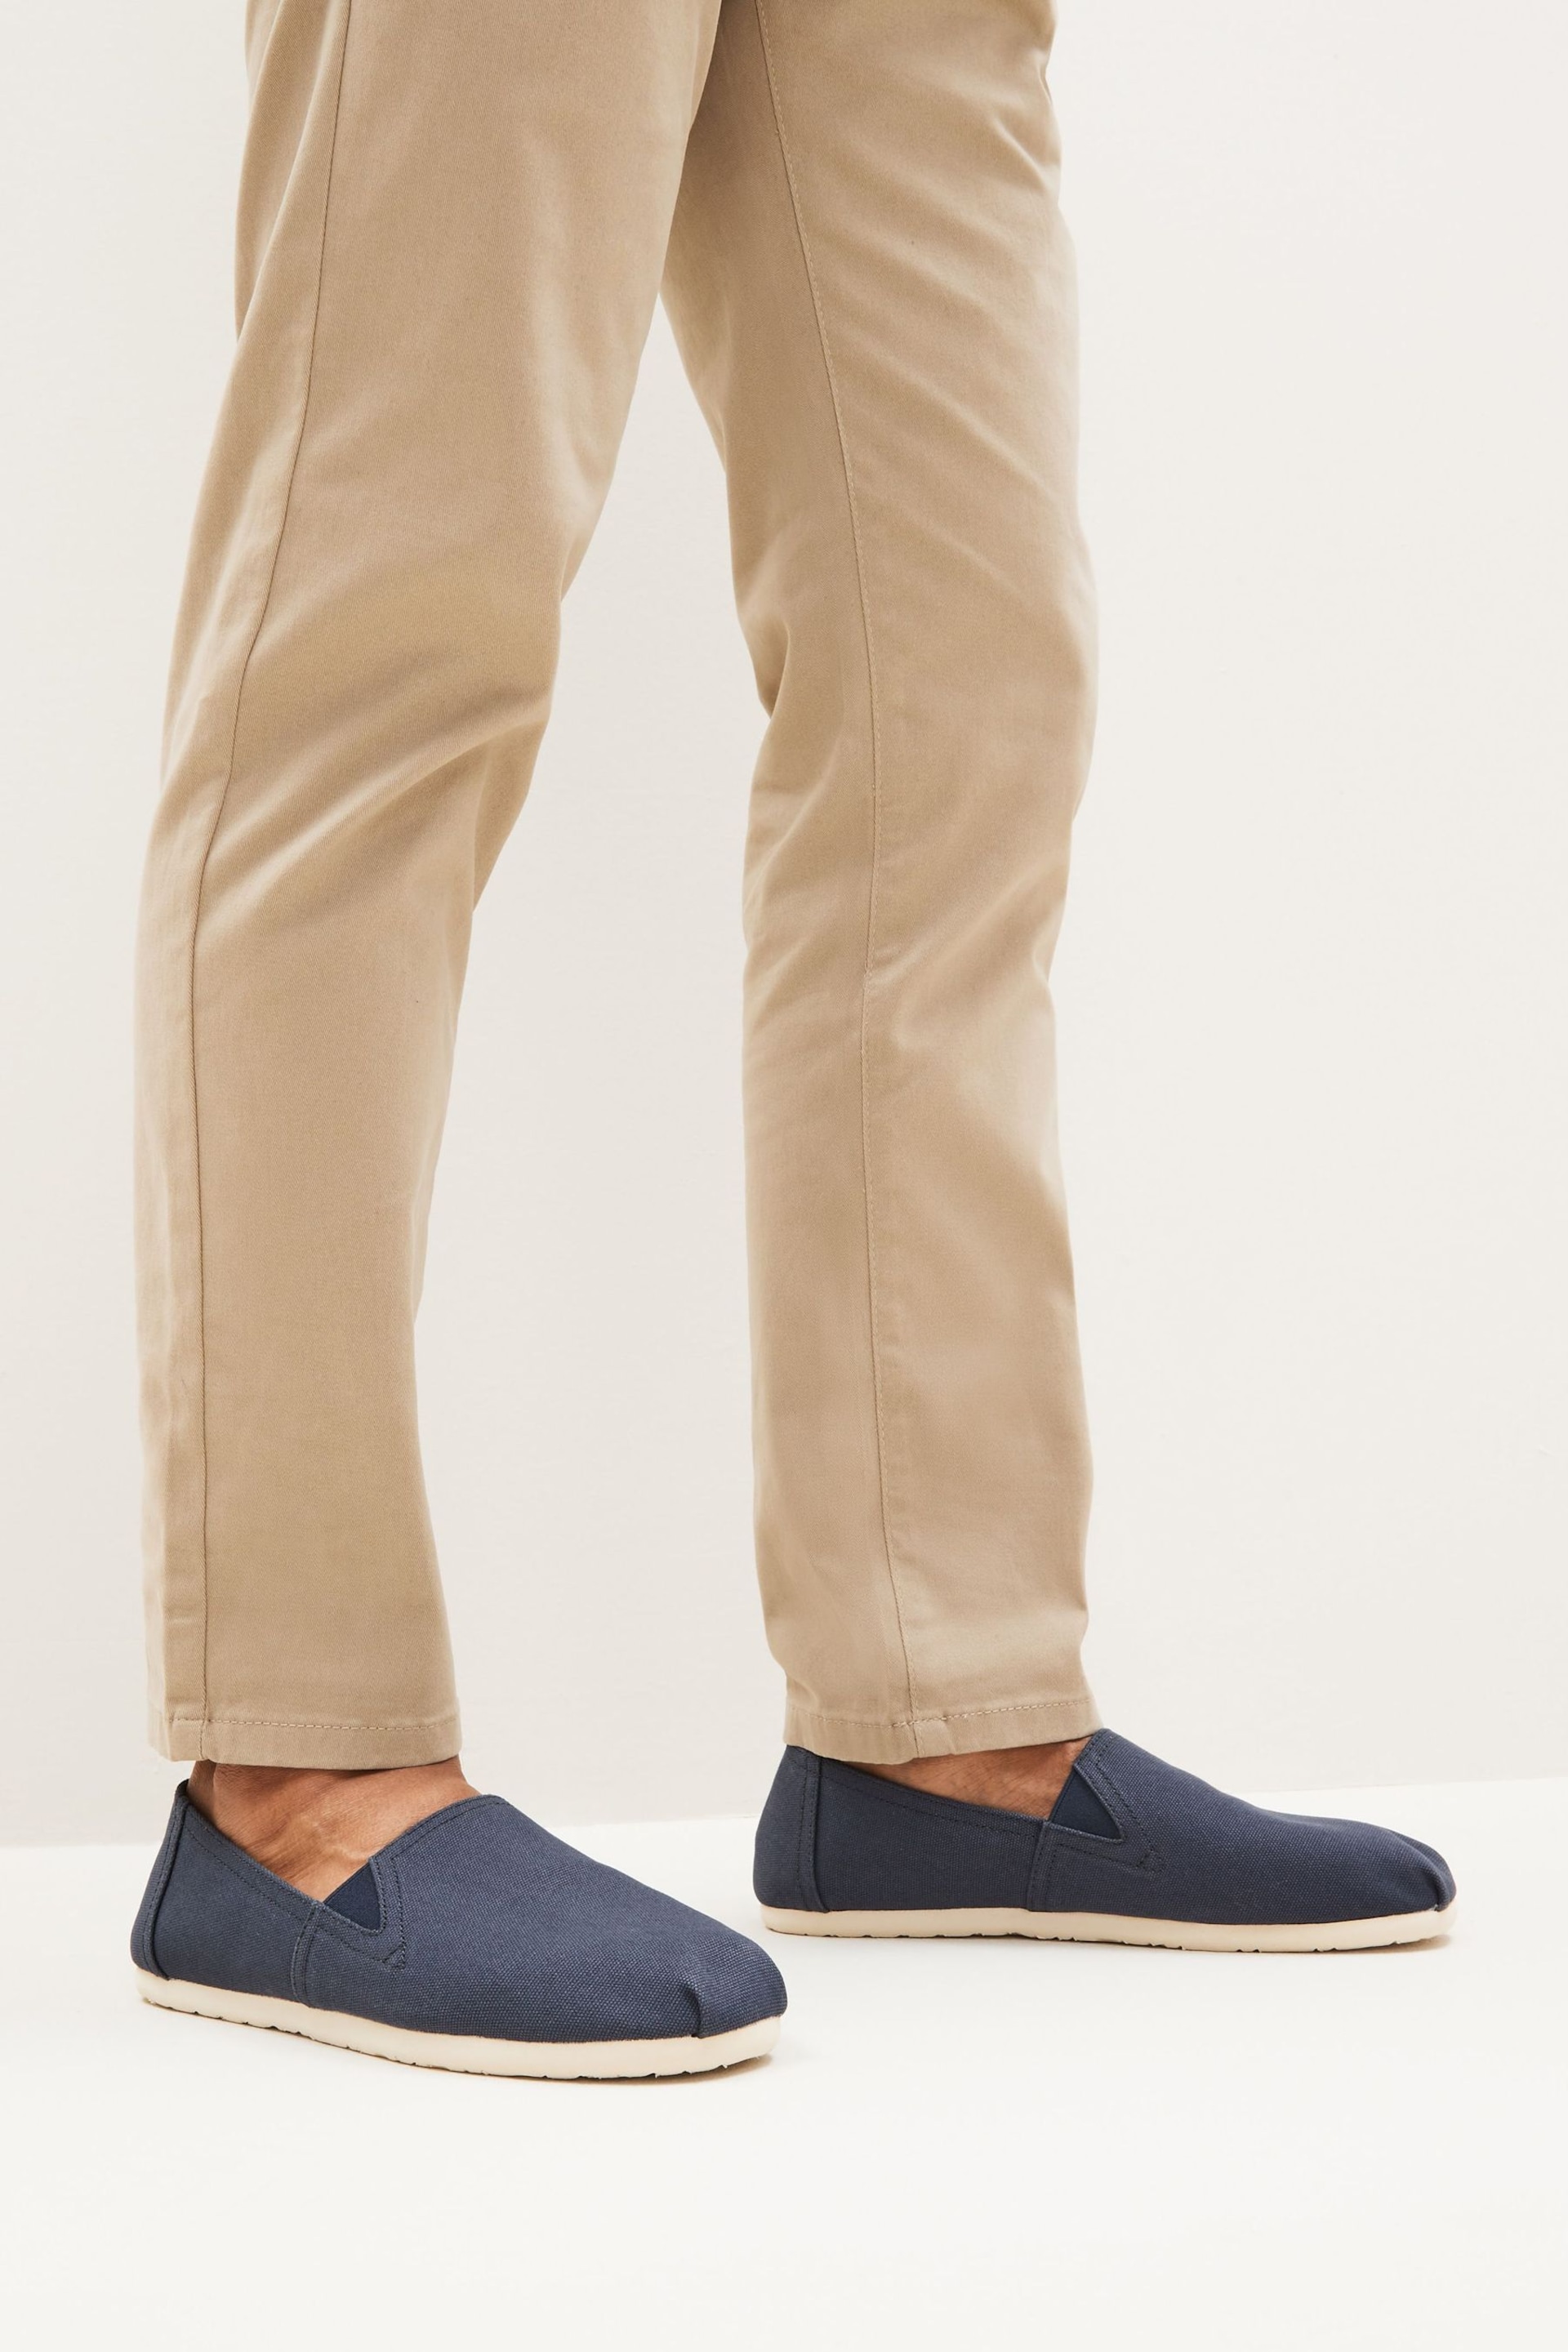 Navy Blue Canvas Slip-On Shoes - Image 1 of 5